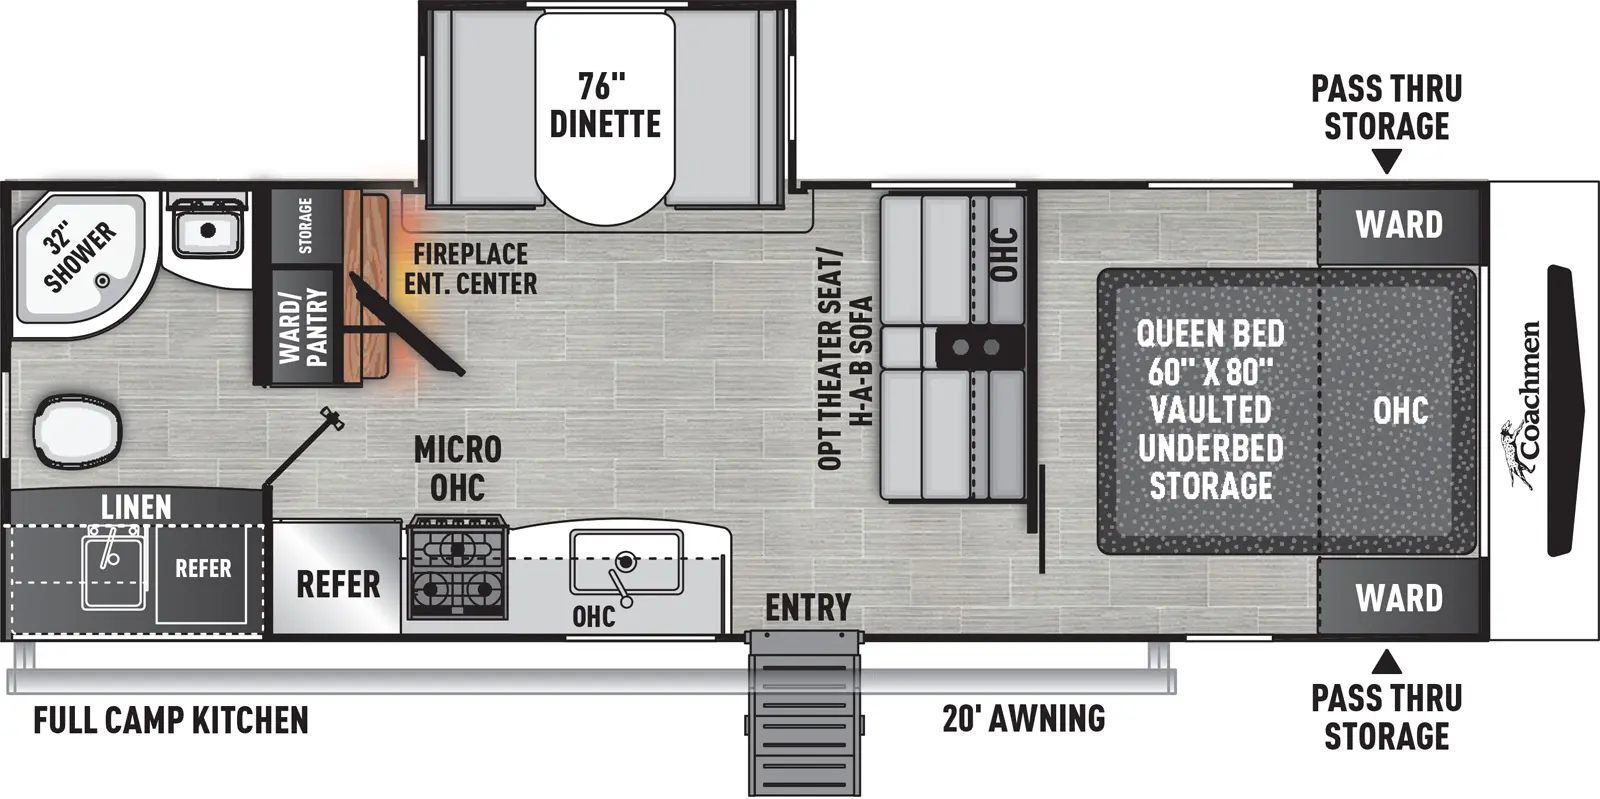 The 252RBS has one slideout and one entry. Exterior features front pass-thru storage, 20 foot awning, and full camp kitchen with refrigerator. Interior layout front to back: foot-facing queen bed with vaulted underbed storage, overhead cabinet, and wardrobes on each side; hide-a-bed sofa with overhead cabinet along inner wall (optional theater seat); off-door side slideout with dinette, and wardrobe/pantry and storage with entertainment center and fireplace along inner wall; door side entry, kitchen counter with sink, overhead cabinet, microwave, cooktop, and refrigerator; rear full bathroom with linen closet.